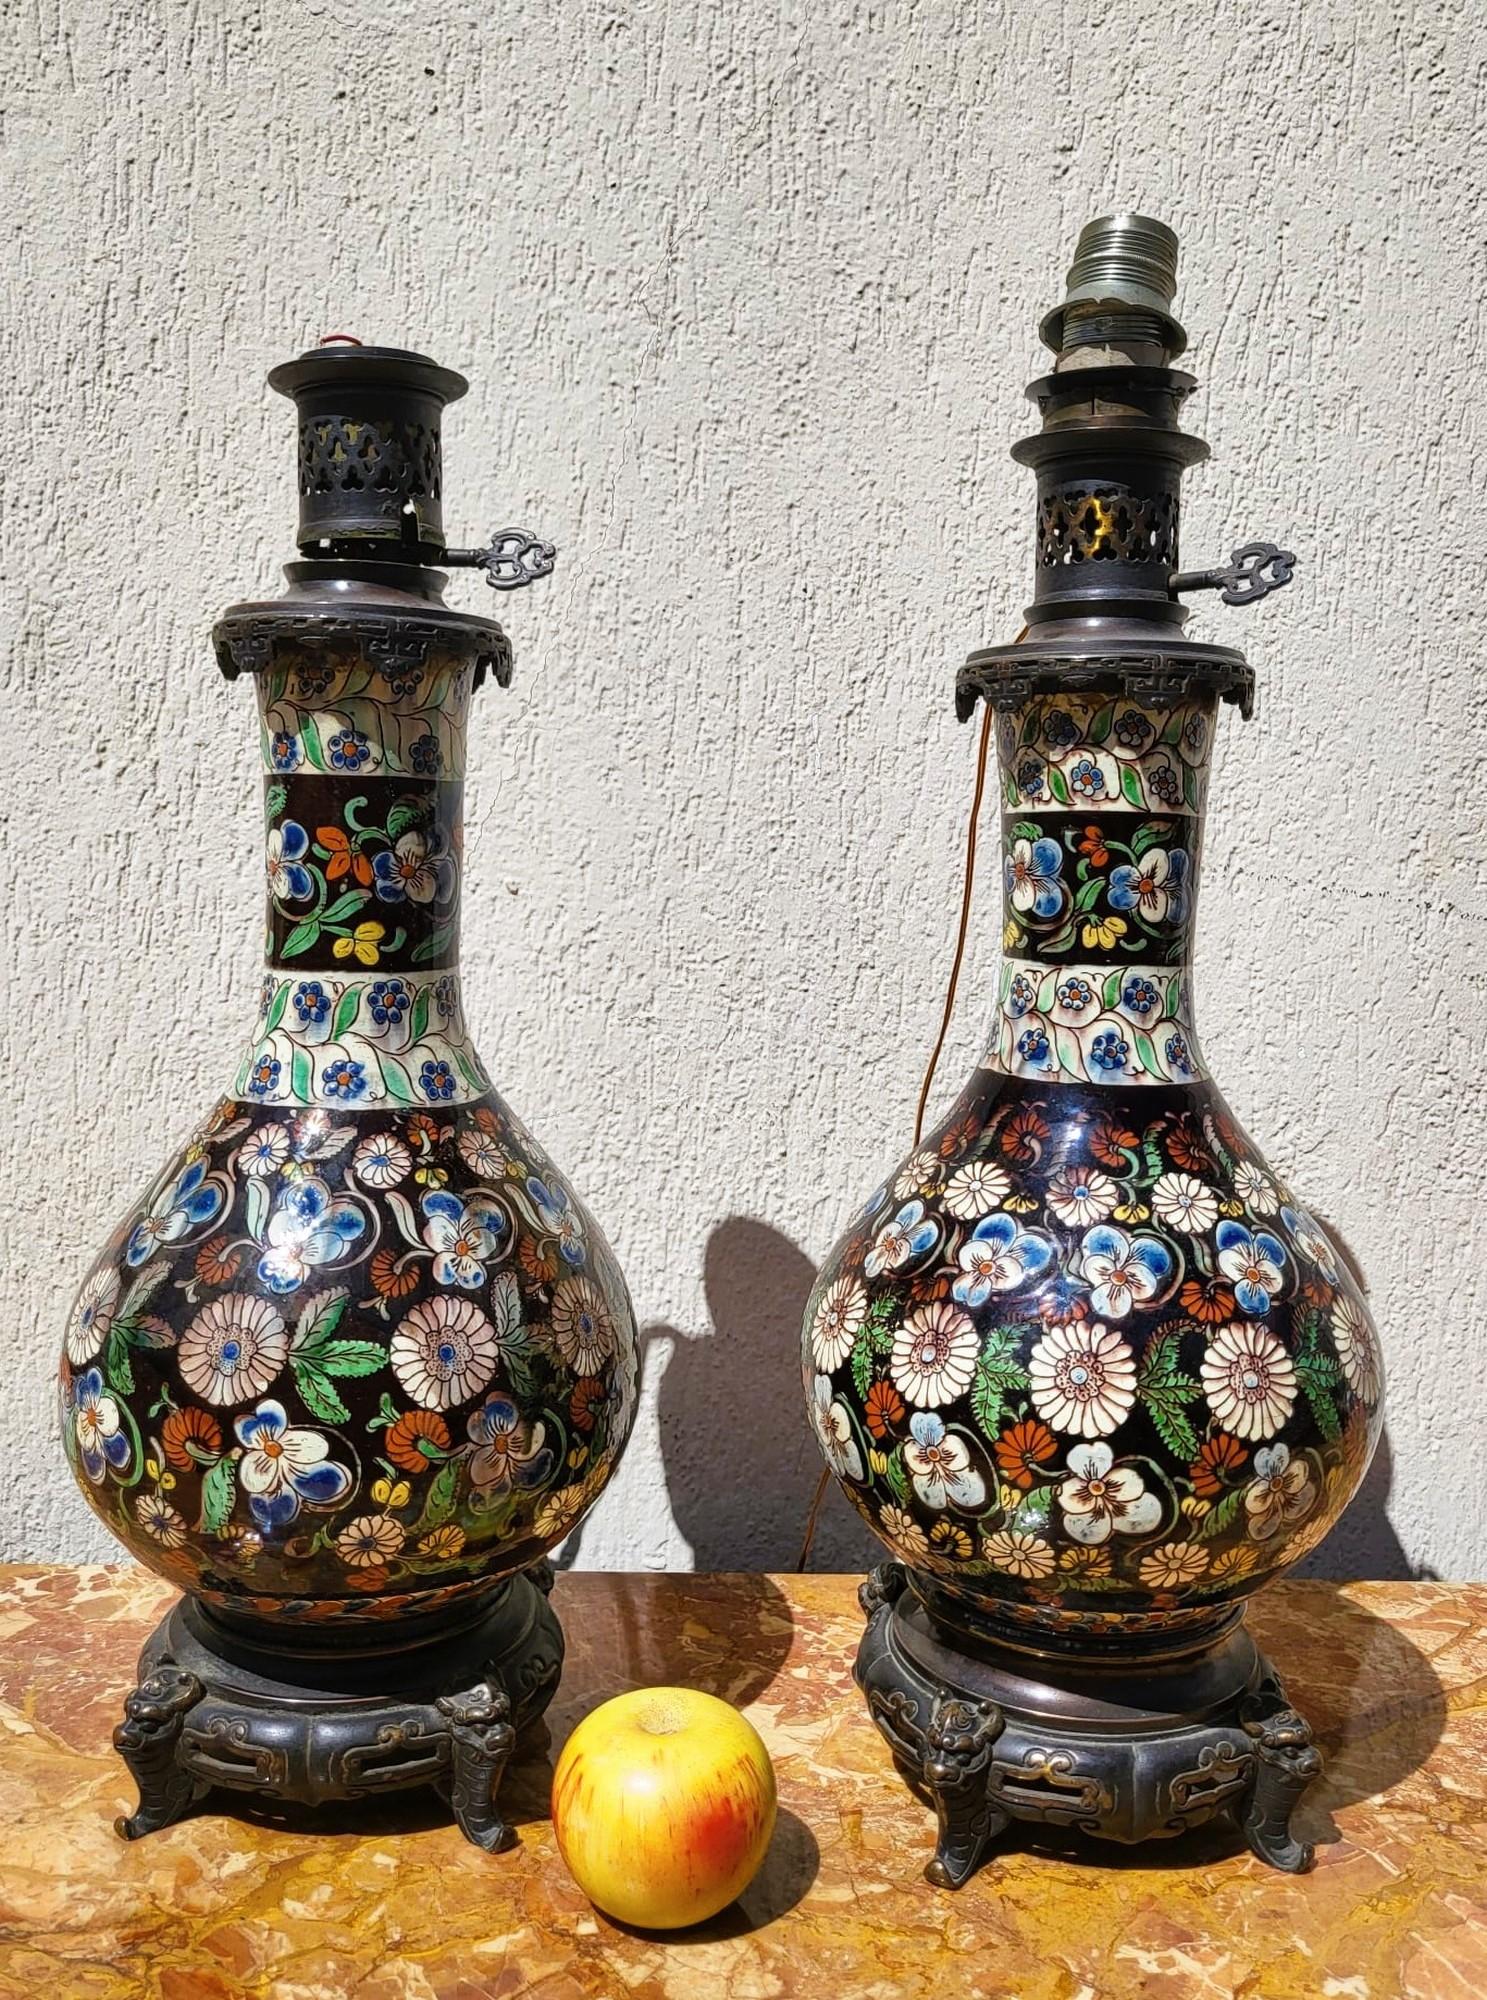 Pair of large earthenware lamps from Thun, decorated with flowers on a brown background and mounted on a bronze base in the Japanese style

An old restoration at one of the necks

Wear and tear, electricity to be reviewed (or done to US